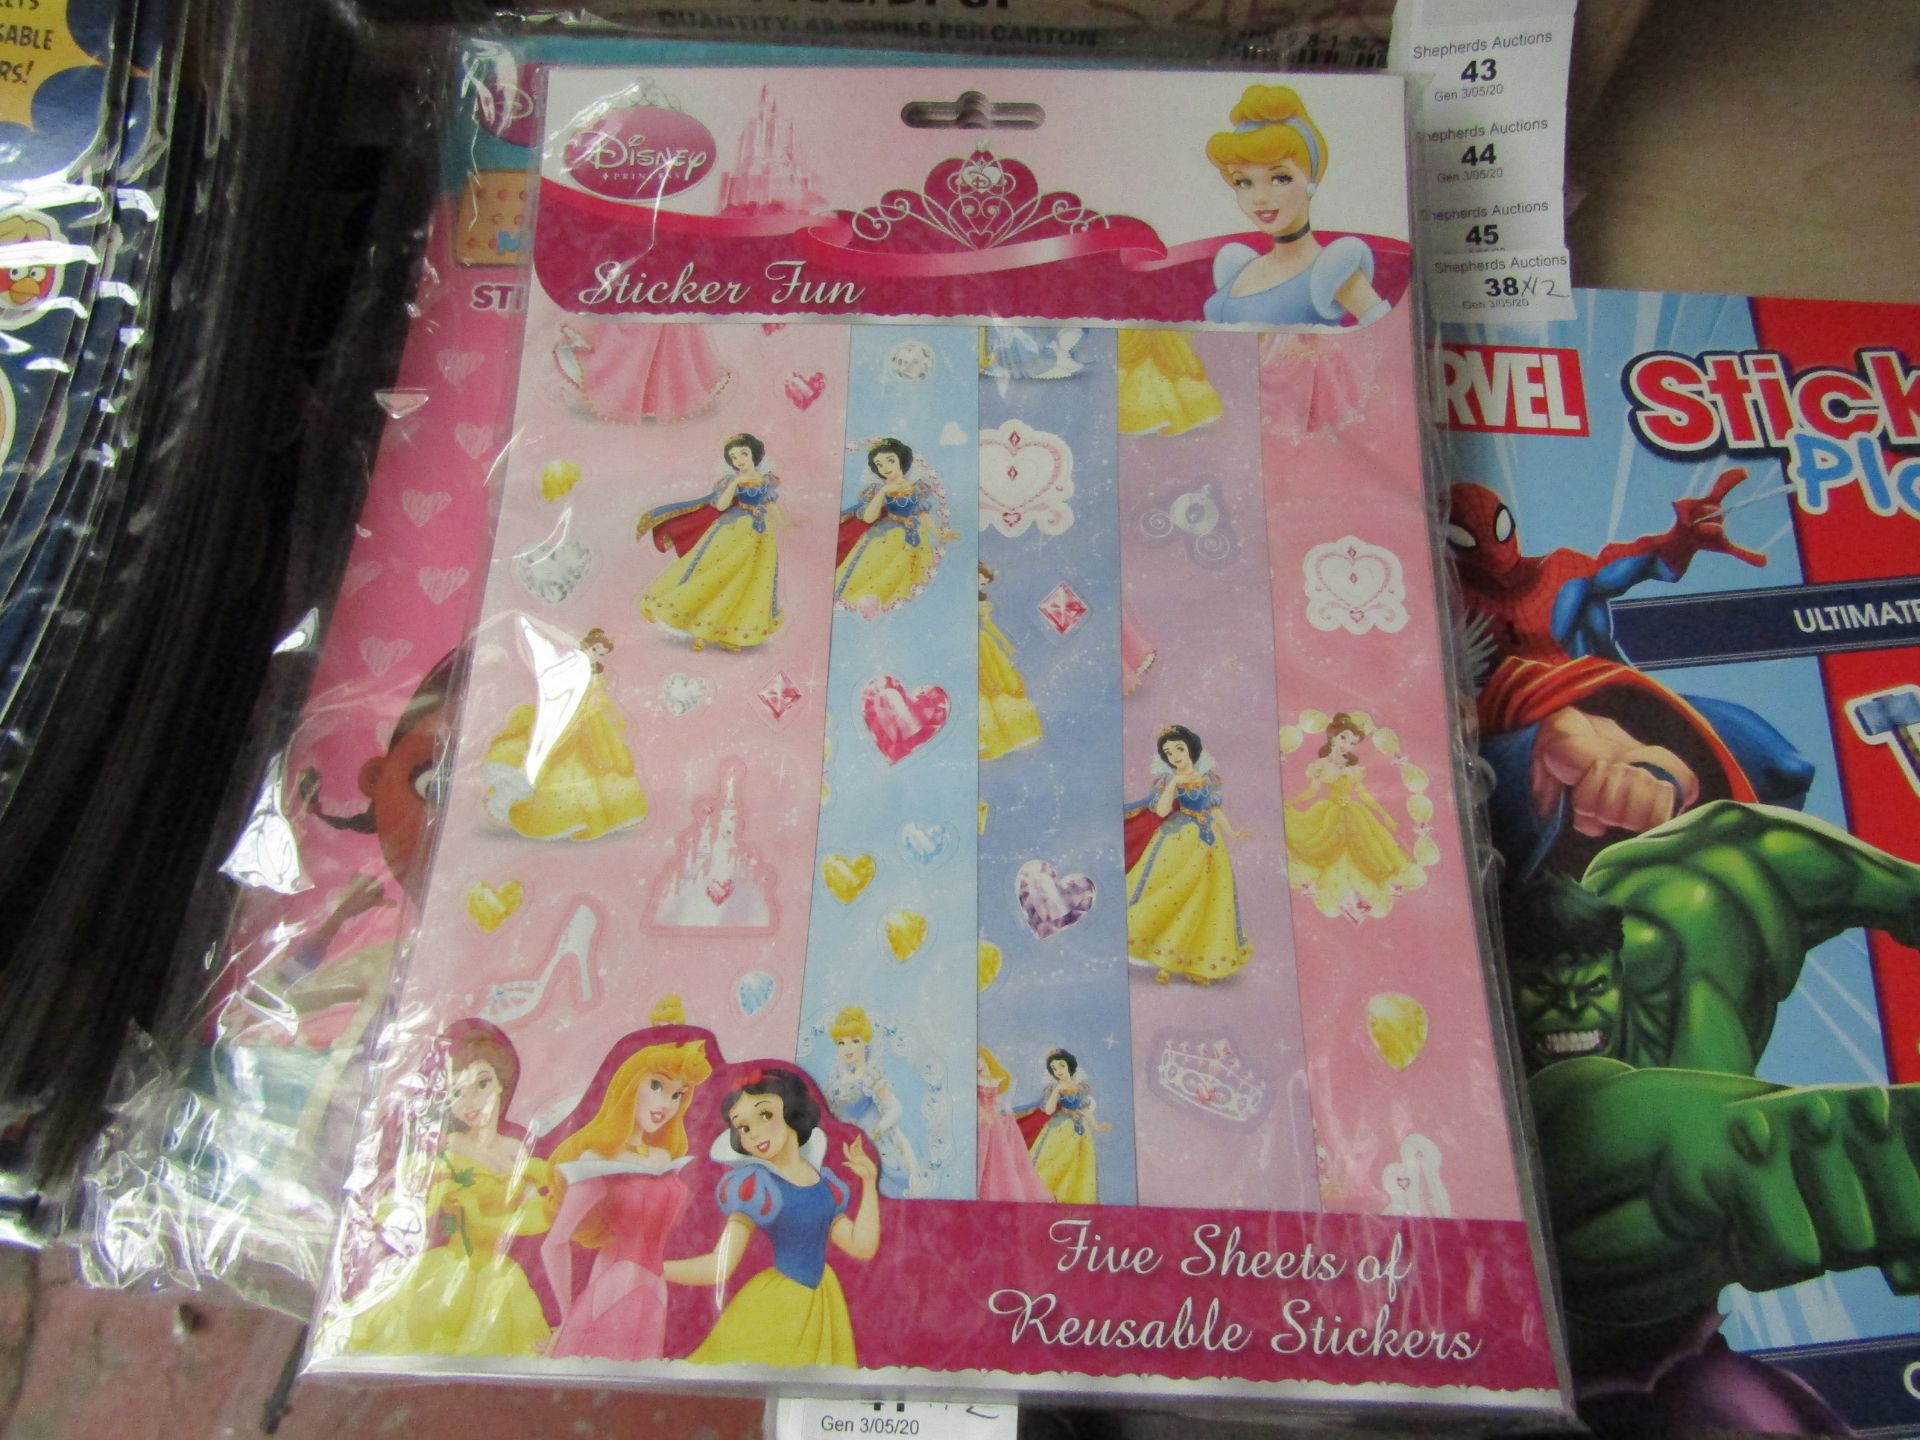 12 x Disney princess Sticker Fun Books with 5 Sheets of Reusable Stickers in each Book. New &